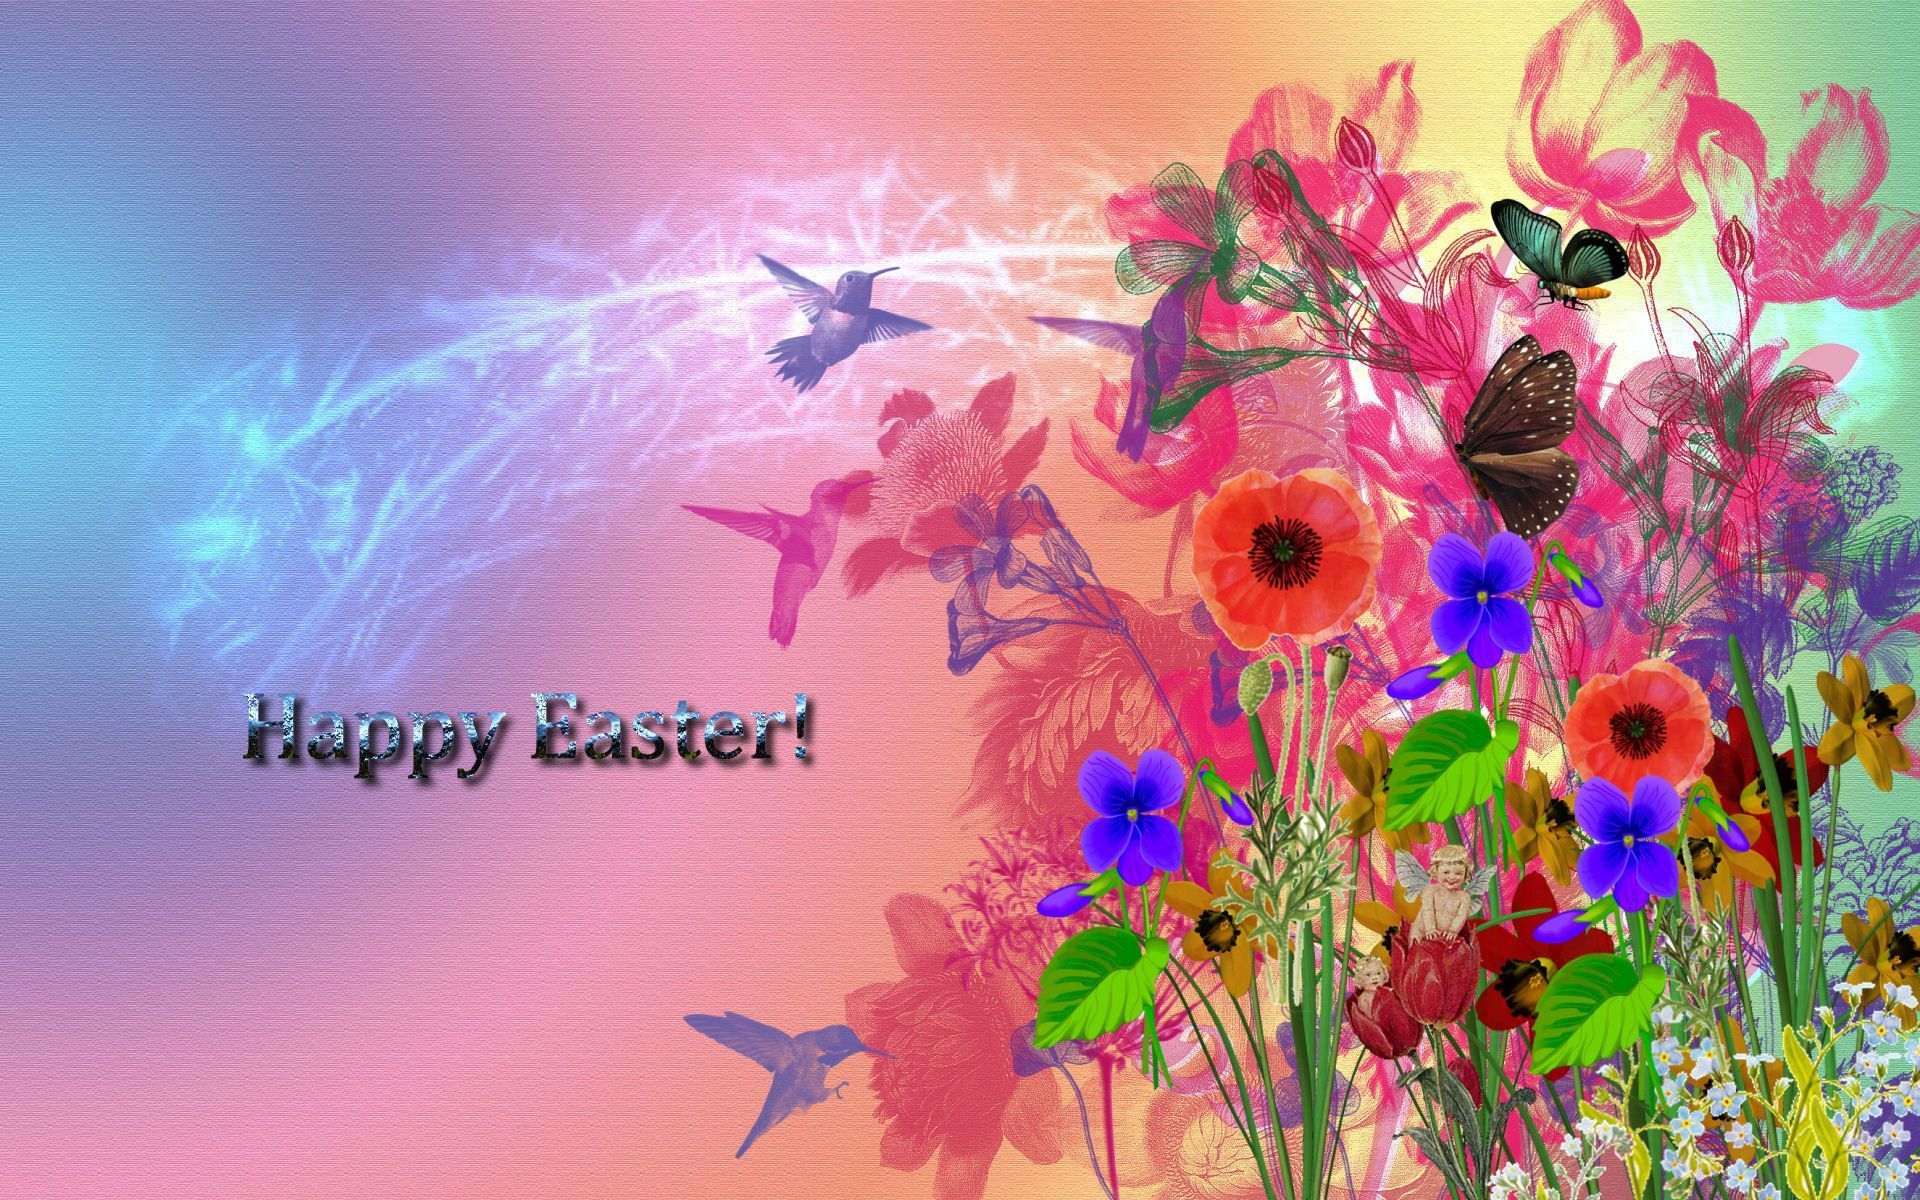 Easter Wallpaper 2014 | Happy Easter Wallpapers Free | Cool Wallpapers